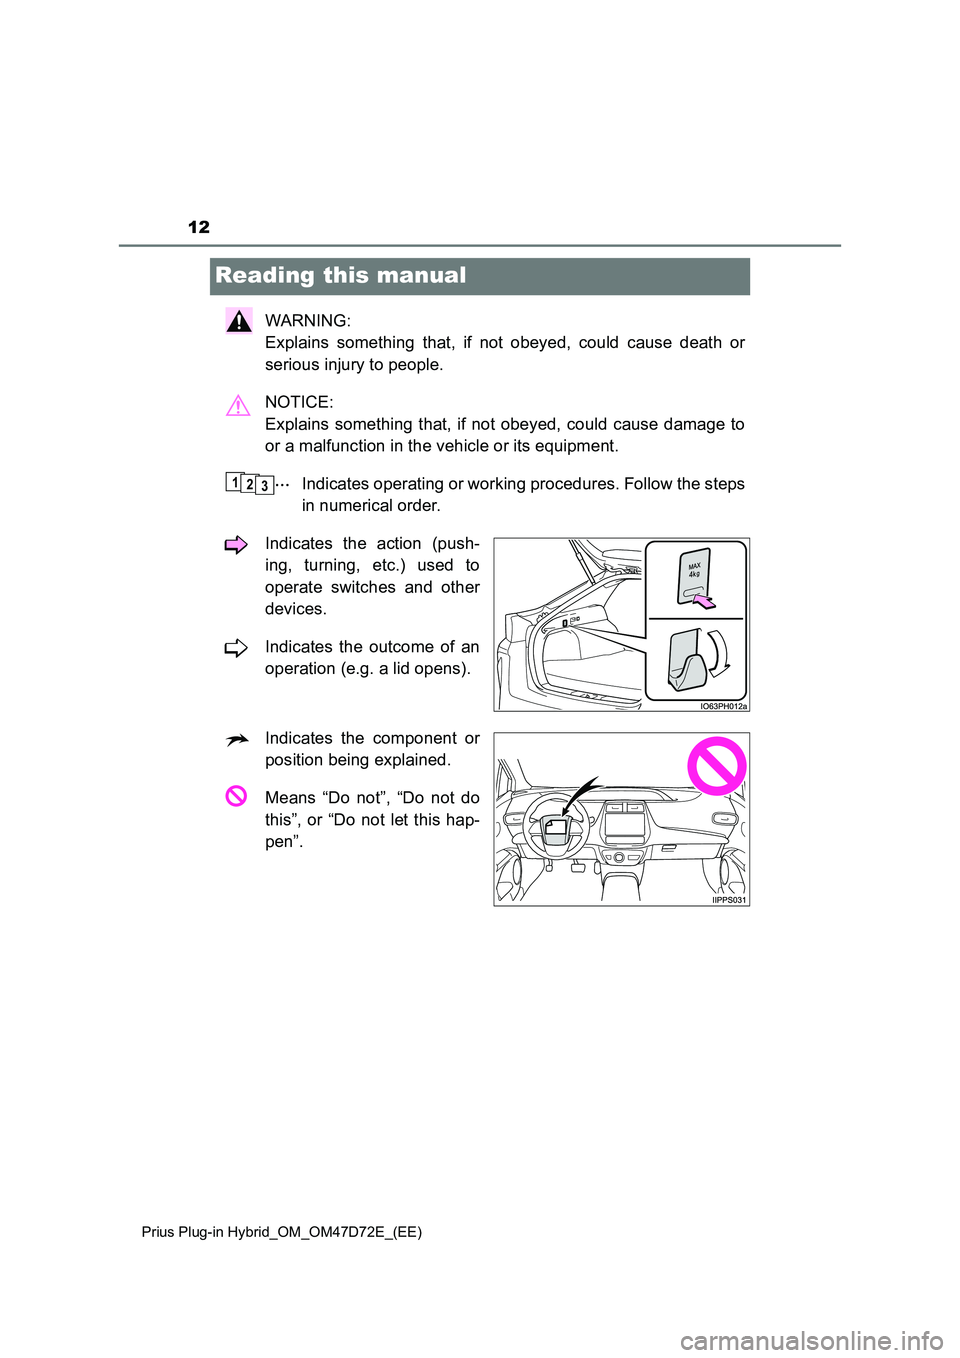 TOYOTA PRIUS PLUG-IN HYBRID 2020  Owners Manual 12
Prius Plug-in Hybrid_OM_OM47D72E_(EE)
Reading this manual
WARNING:  
Explains something that, if not obeyed, could cause death or 
serious injury to people. 
NOTICE:  
Explains something that, if n